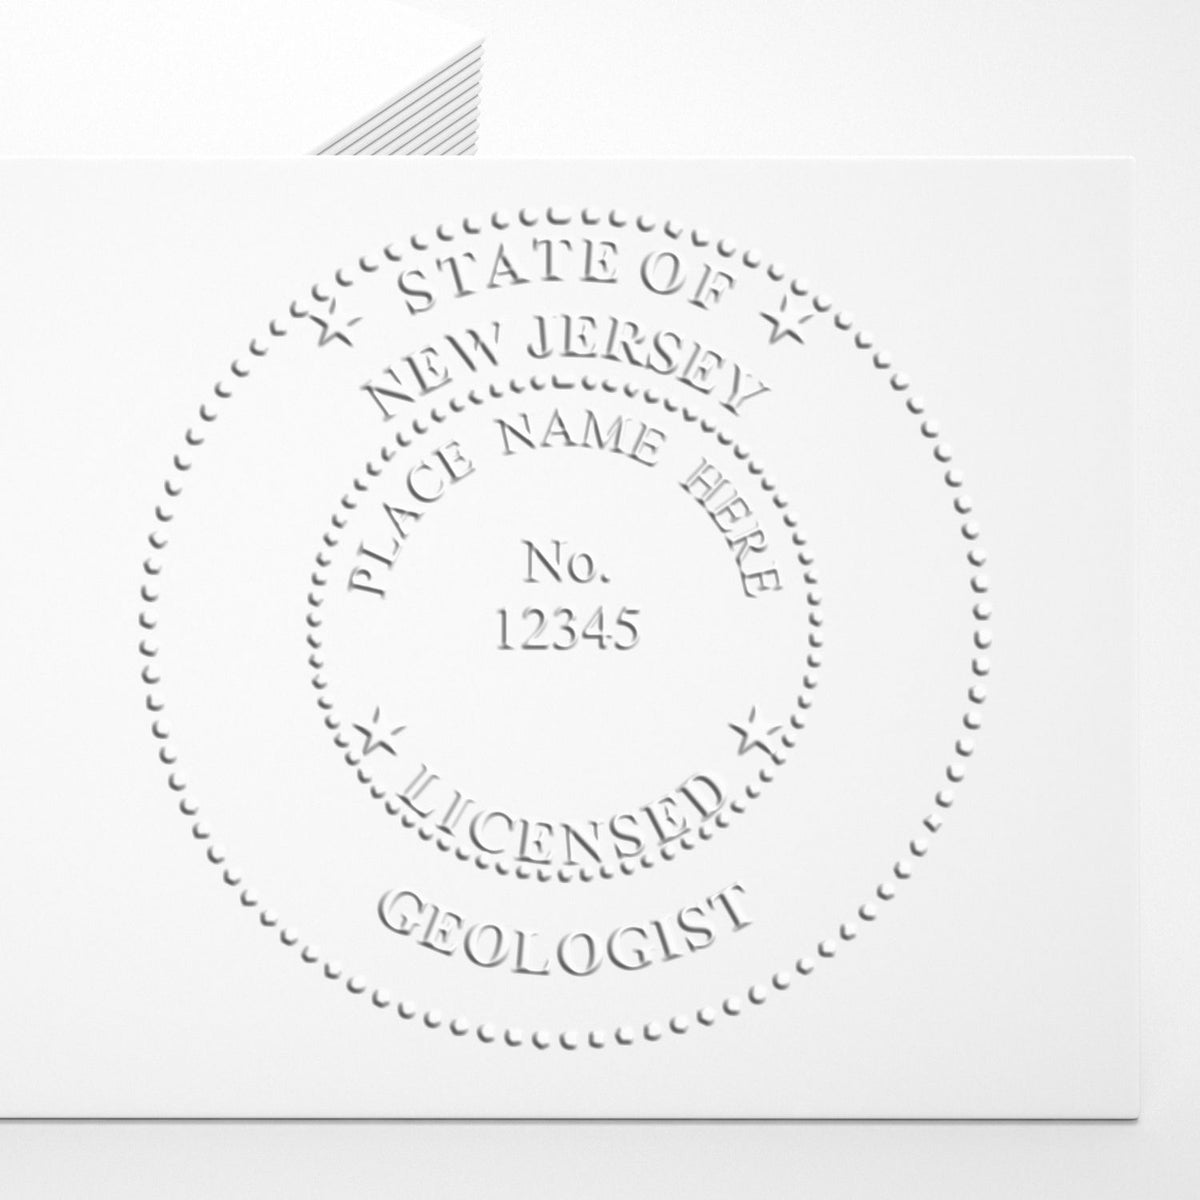 An in use photo of the New Jersey Geologist Desk Seal showing a sample imprint on a cardstock